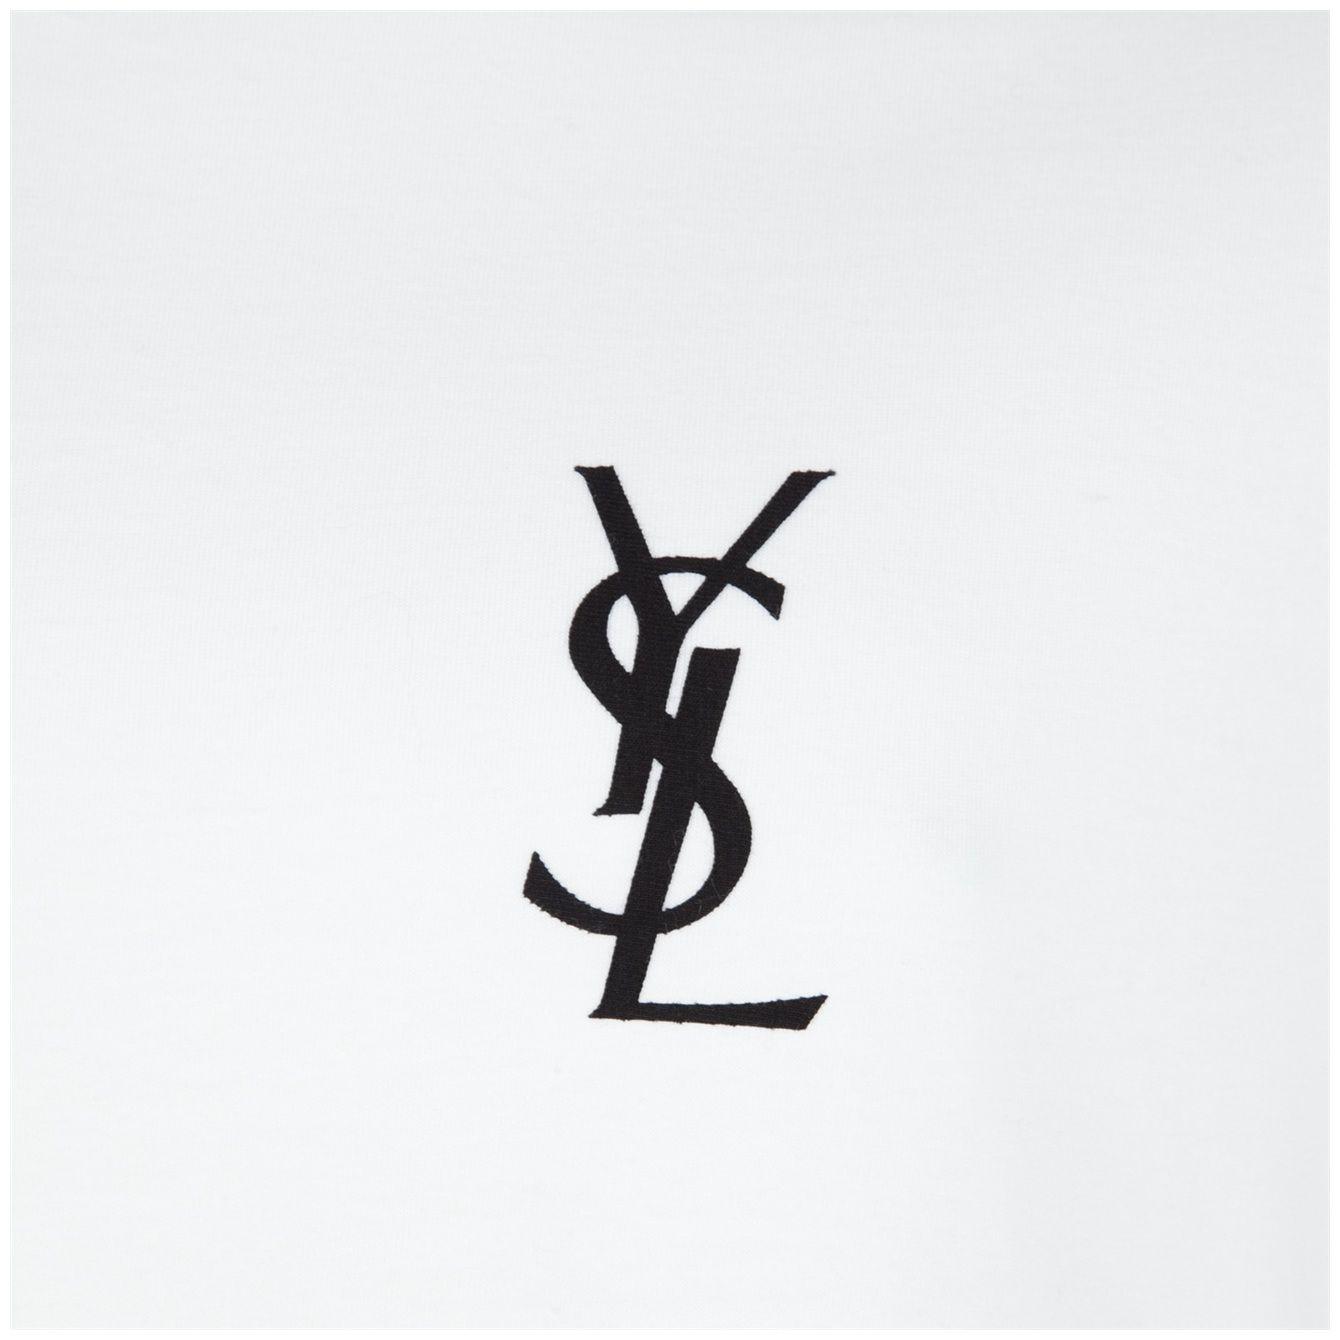 YSL Logo and symbol, meaning, history, sign.